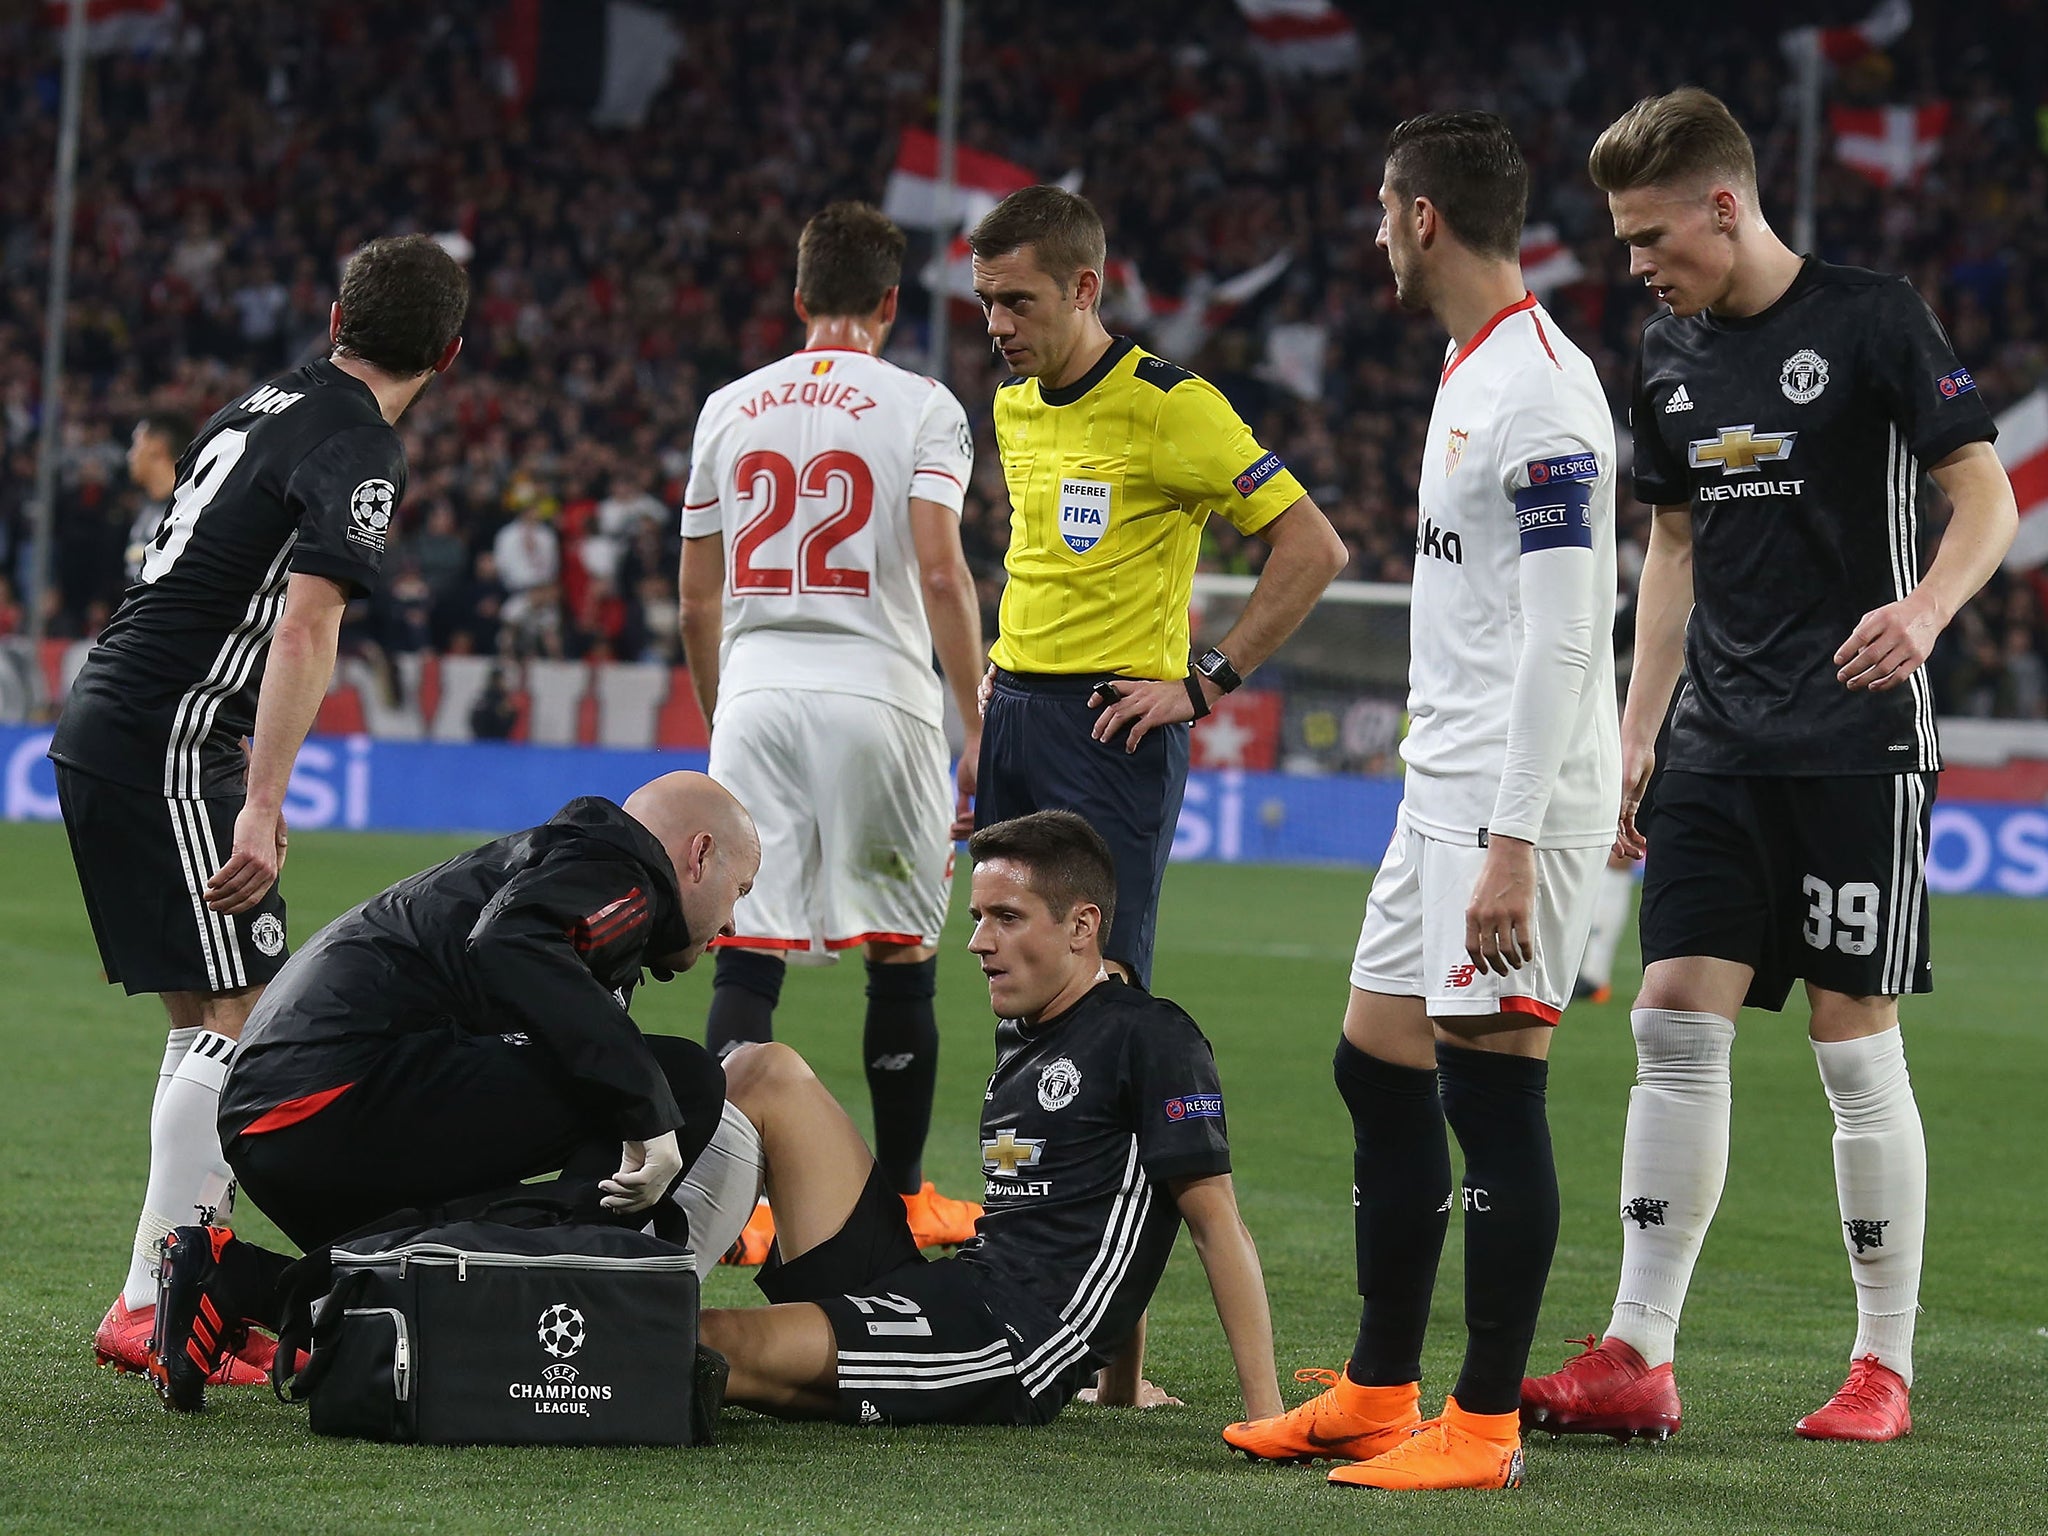 Herrera was forced off int he 17th minute and appears to have suffered a serious injury